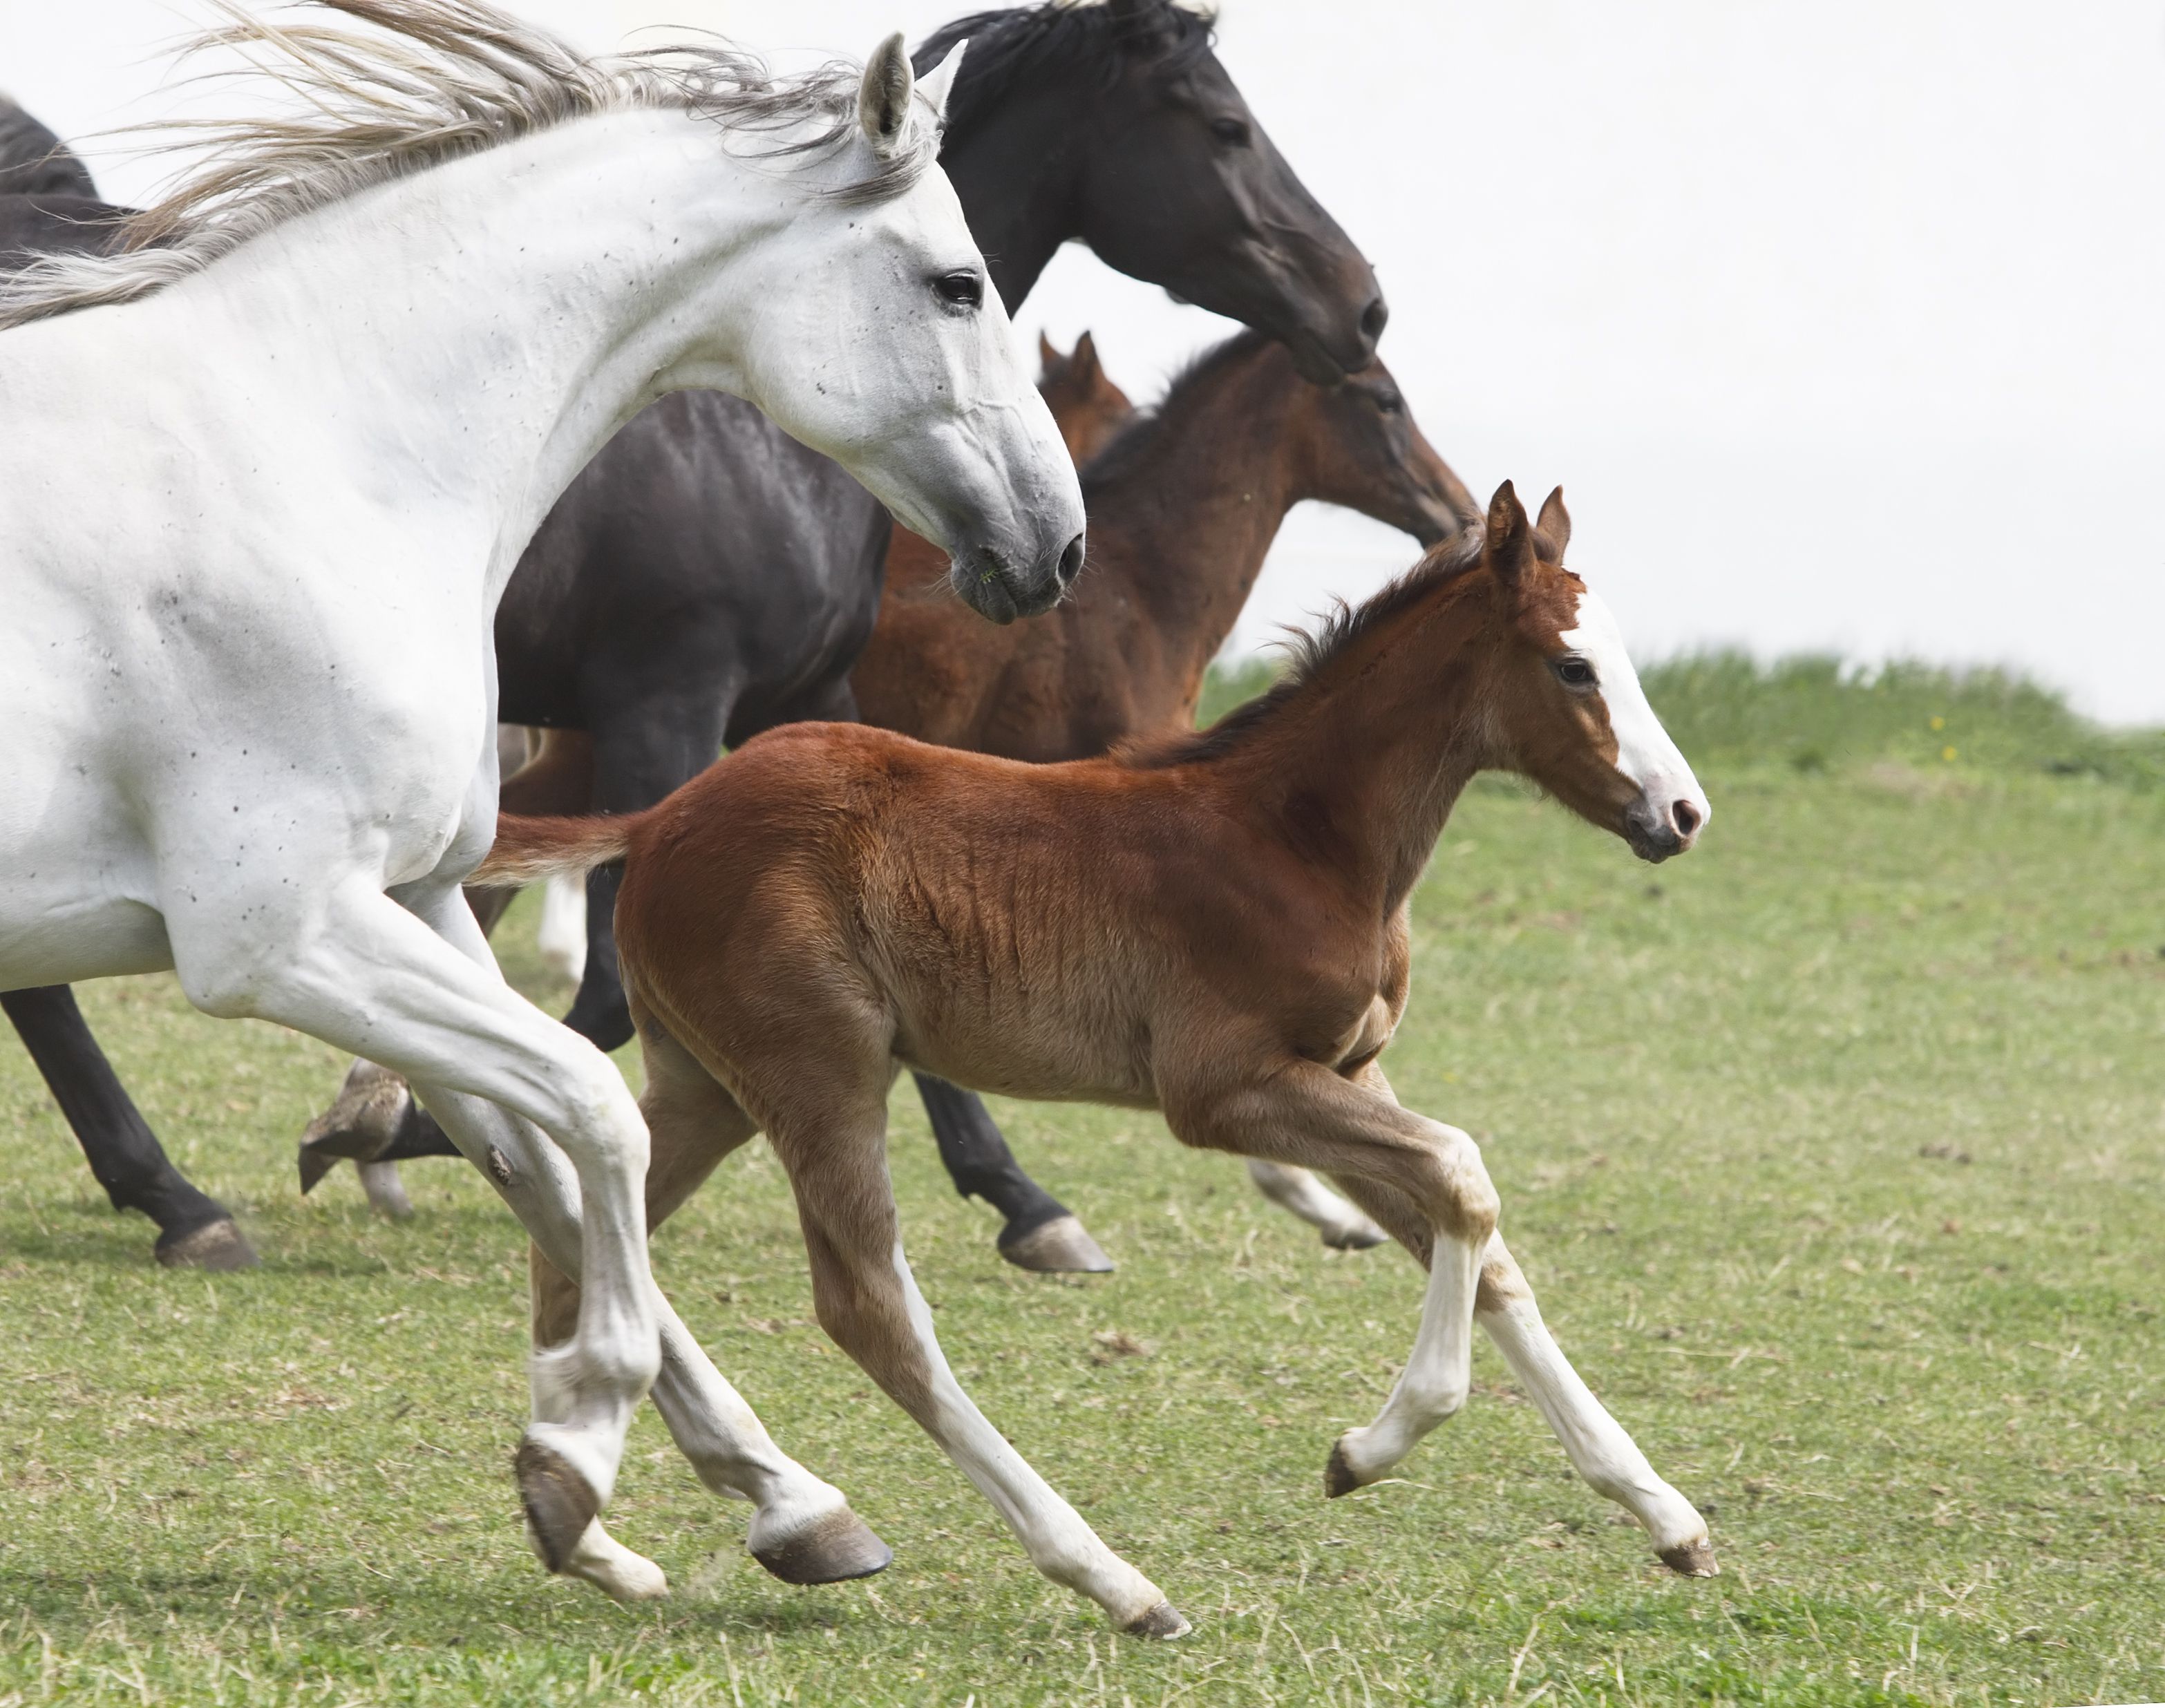 A group of galloping horses and a foal in an open field